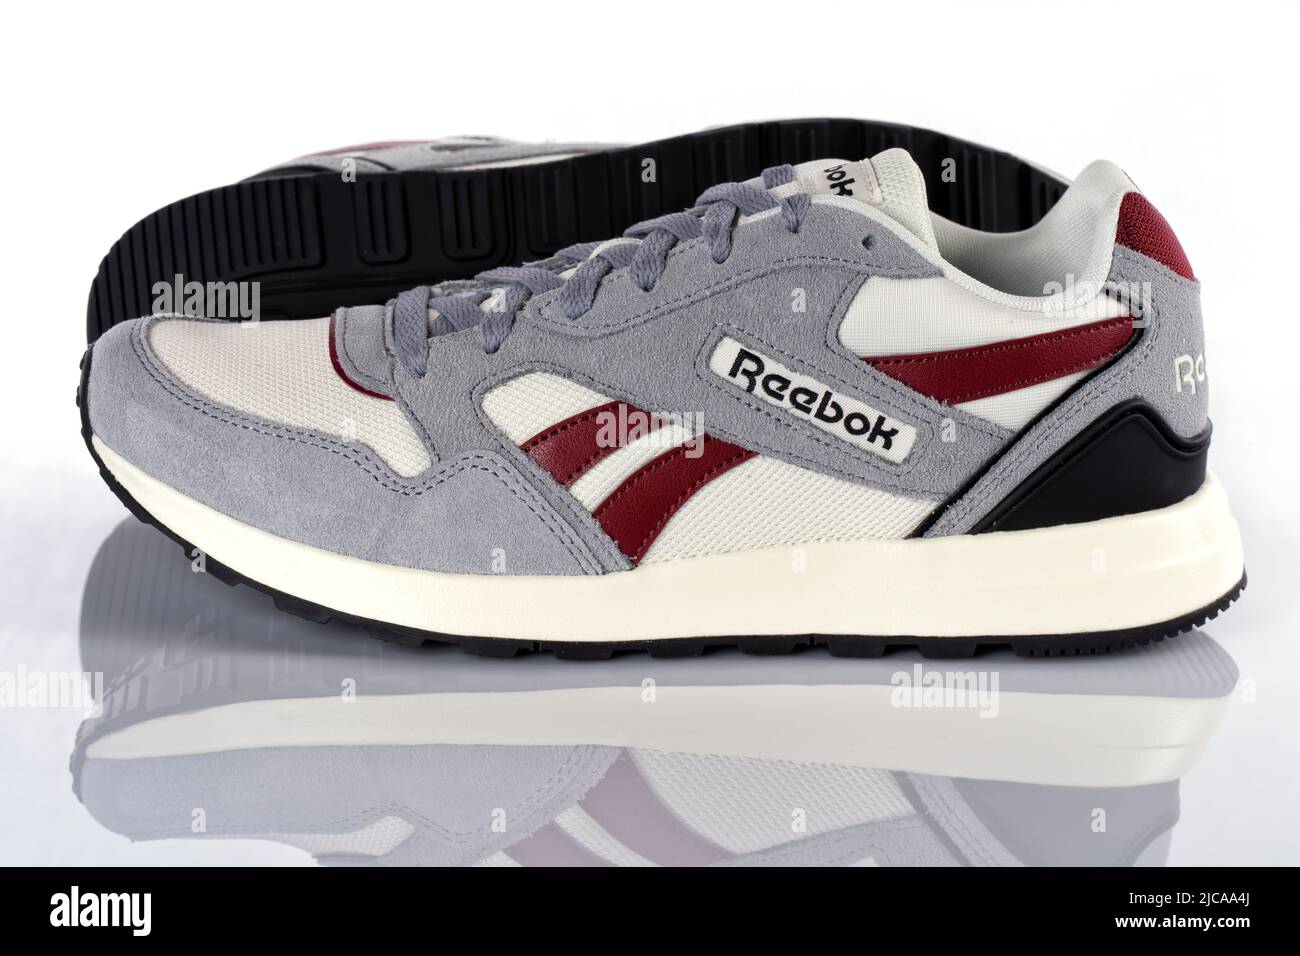 New Reebok Gl1000 Multicolor Chalk Classic Burgundy Core Black running  shoes isolated on white. Photograph taken on June 10, 2022 in Spain Stock  Photo - Alamy